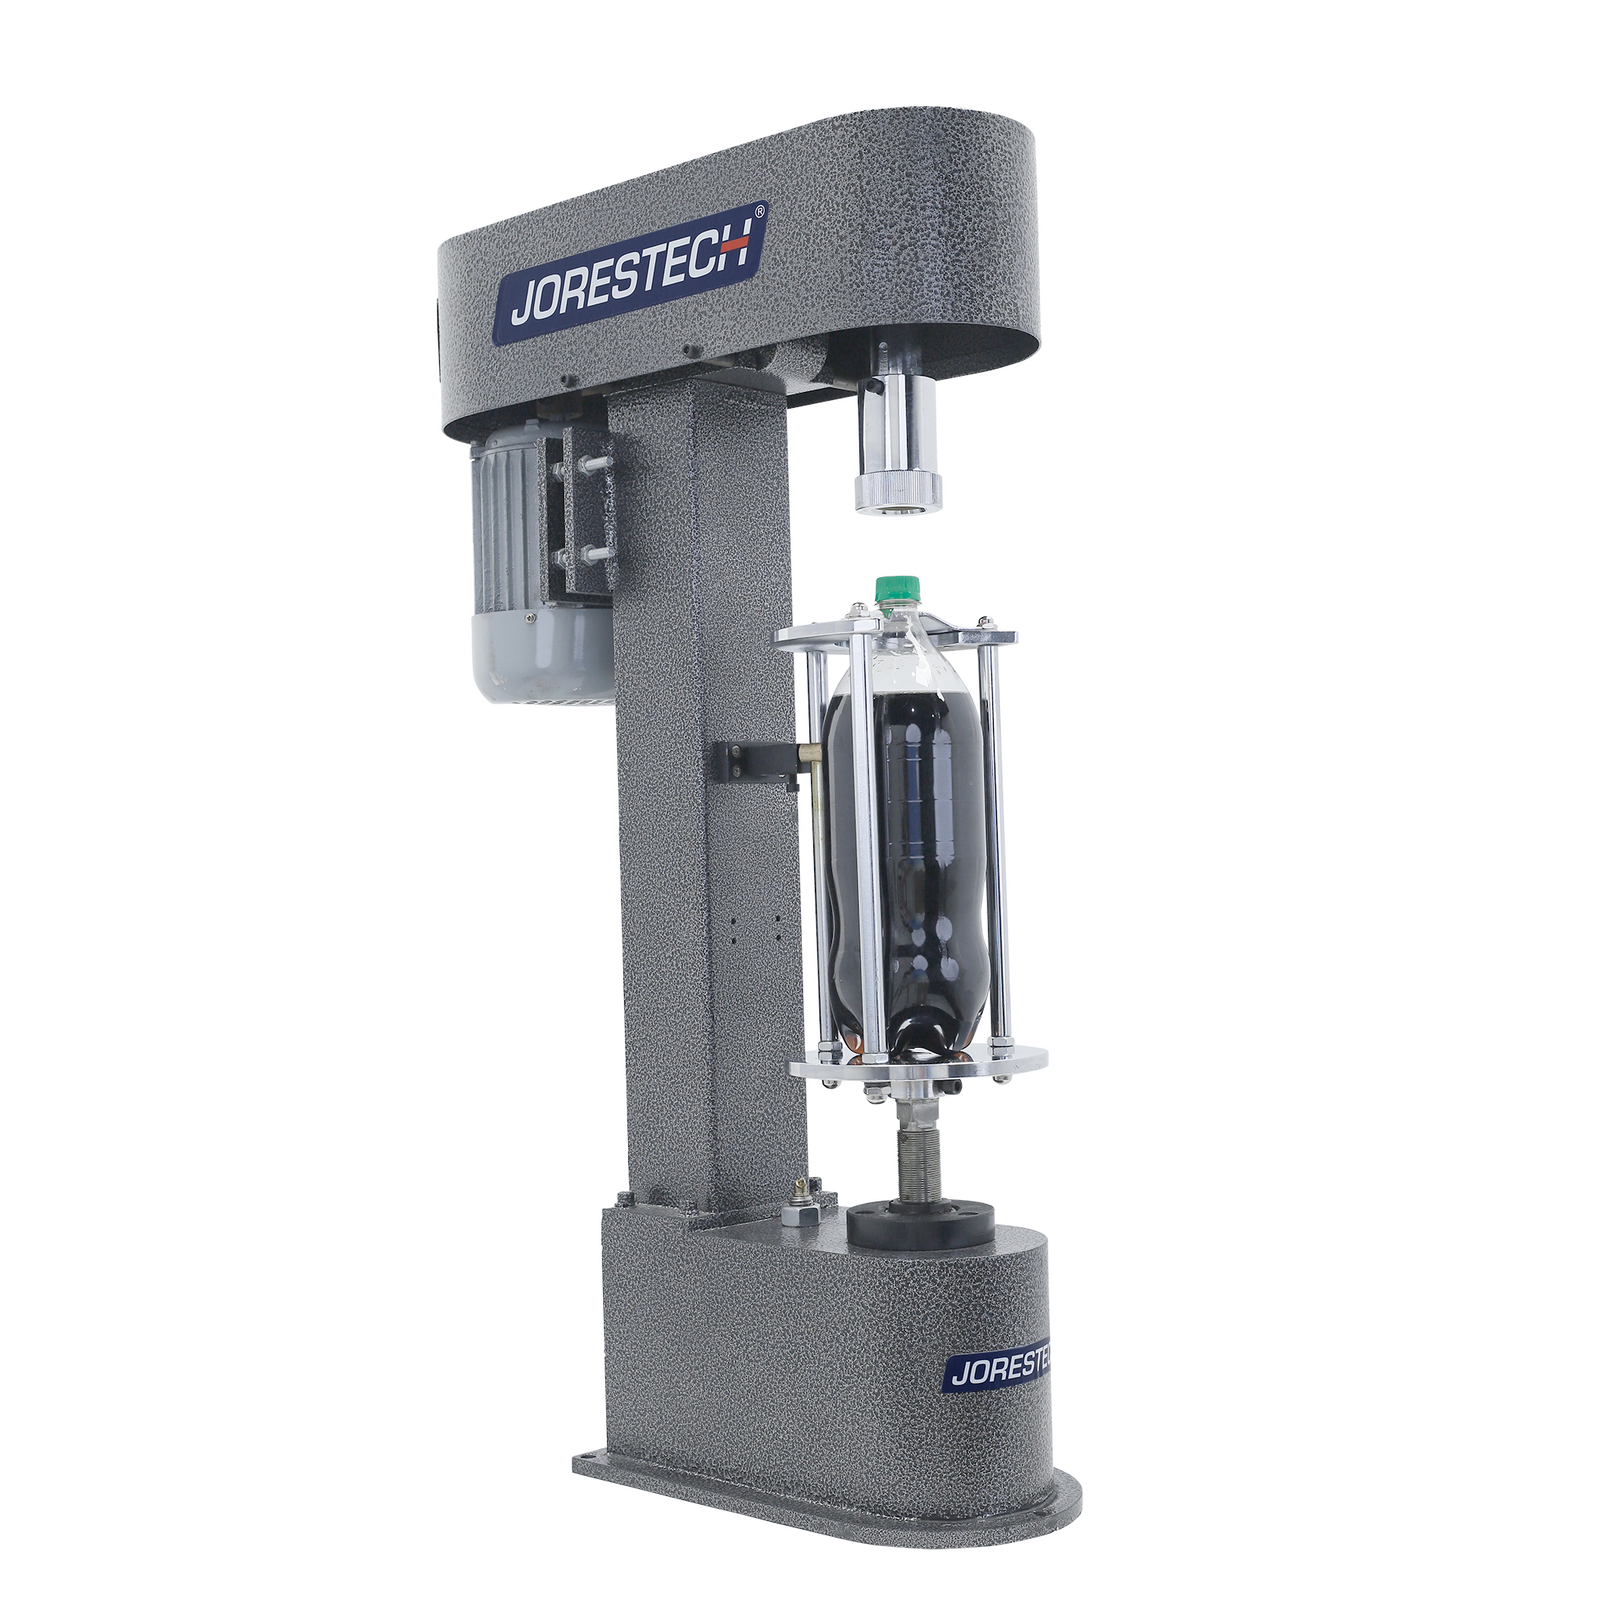 The bottle capper with JORES TECHNOLOGIES® logo on side. The machine has a plastic bottle filled with dark liquid and has a plastic green cap closing the bottle.